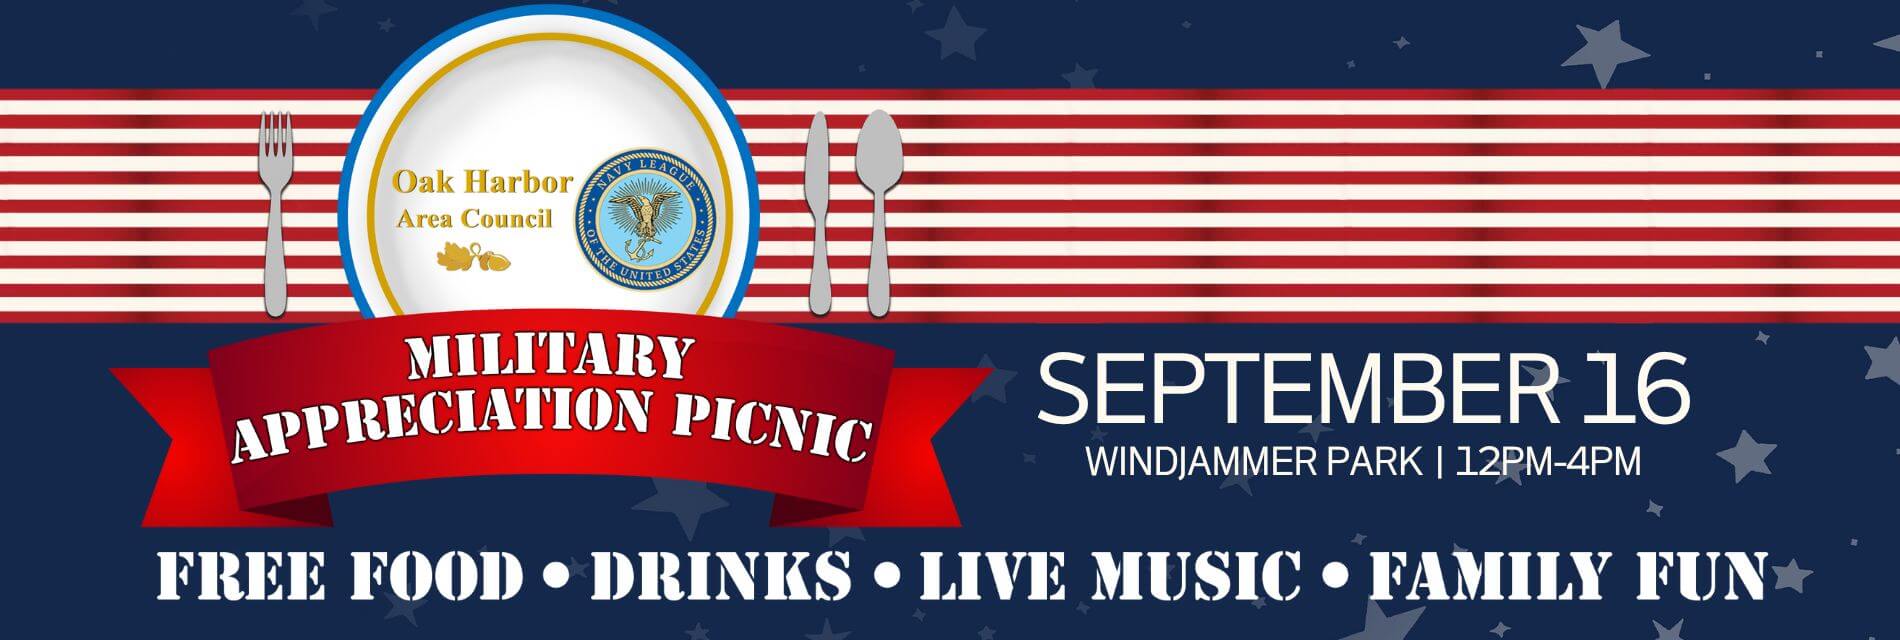 Join us for the Military Appreciation Picnic on September 16, 2023 12pm-4pm at Windjammer Park